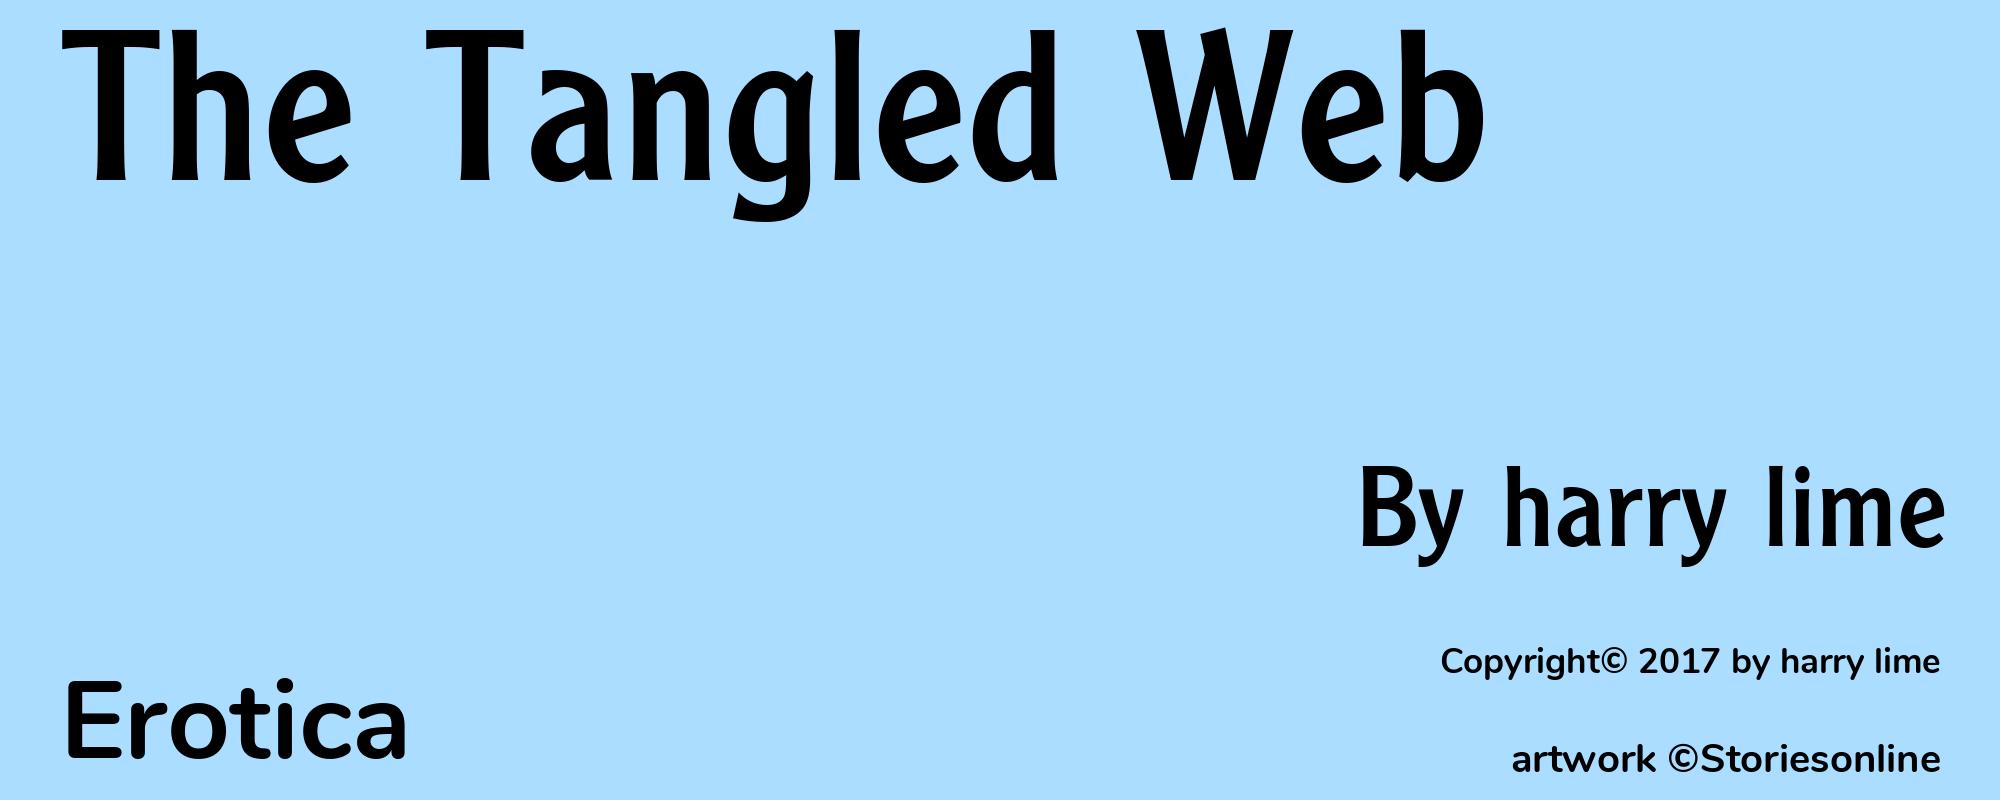 The Tangled Web - Cover